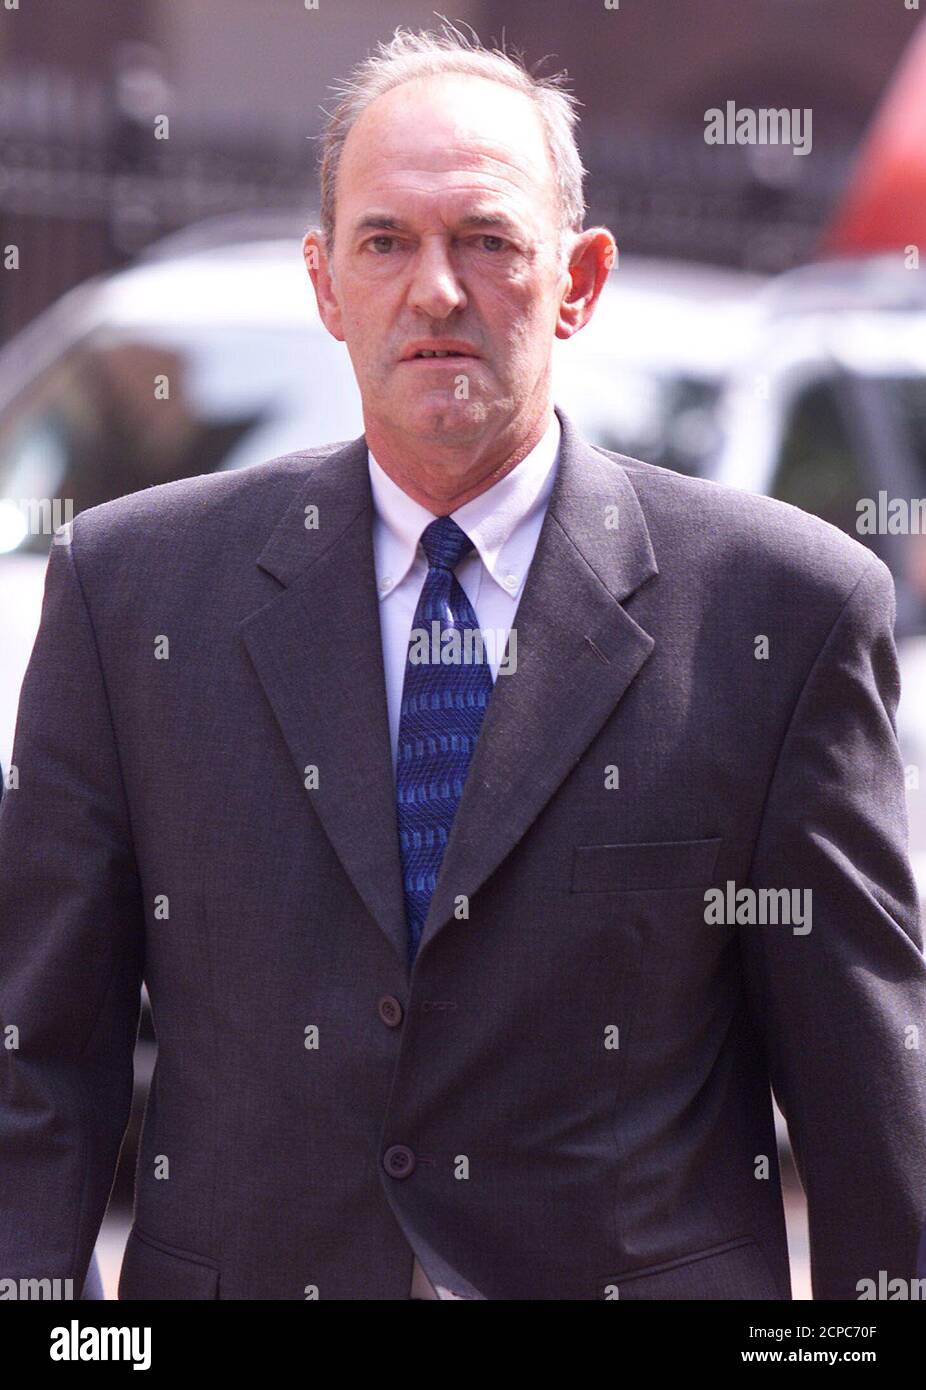 Former South Yorkshire Police Superintendent Bernard Murray awaits a verdict at Leeds Crown Court July 18. Murray and former Chief Superintendant David Duckinfield are charged with manslaughter and wilful neglect of duty in the first criminal proceedings to follow the Hillsborough tragedy in which 96 Liverpool soccer fans were crushed to death at the 1989 FA Cup Semi final.  DC/AA Stock Photo